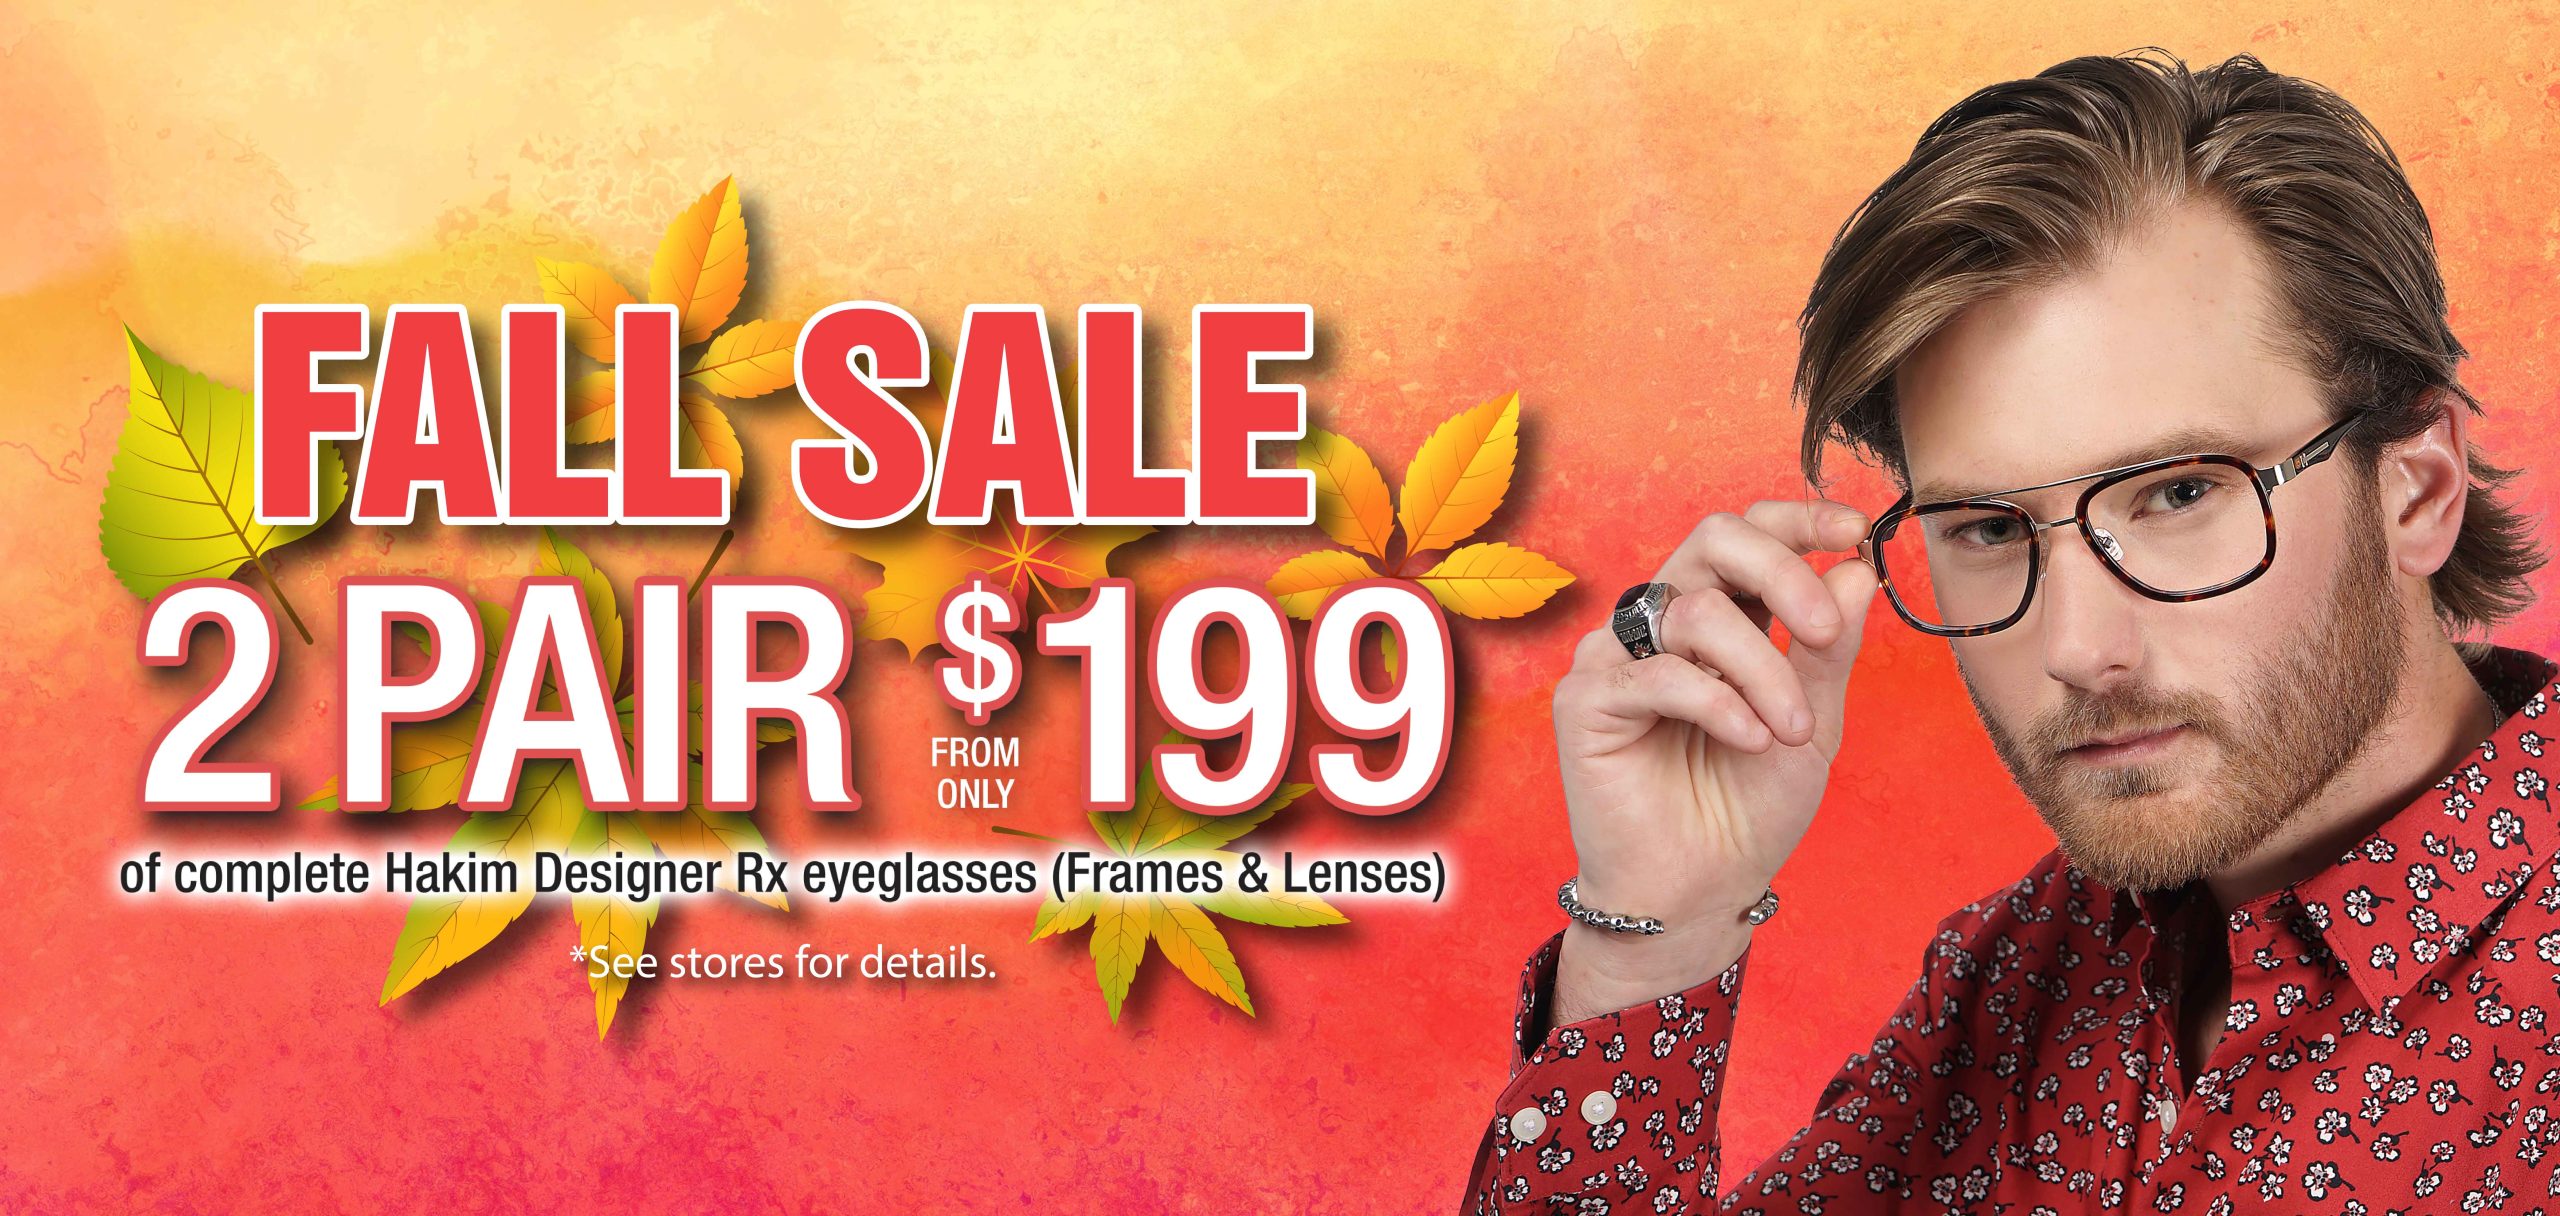 Hakim Optical Fall Sale - Get 2 Pair of RX eyeglasses from $199